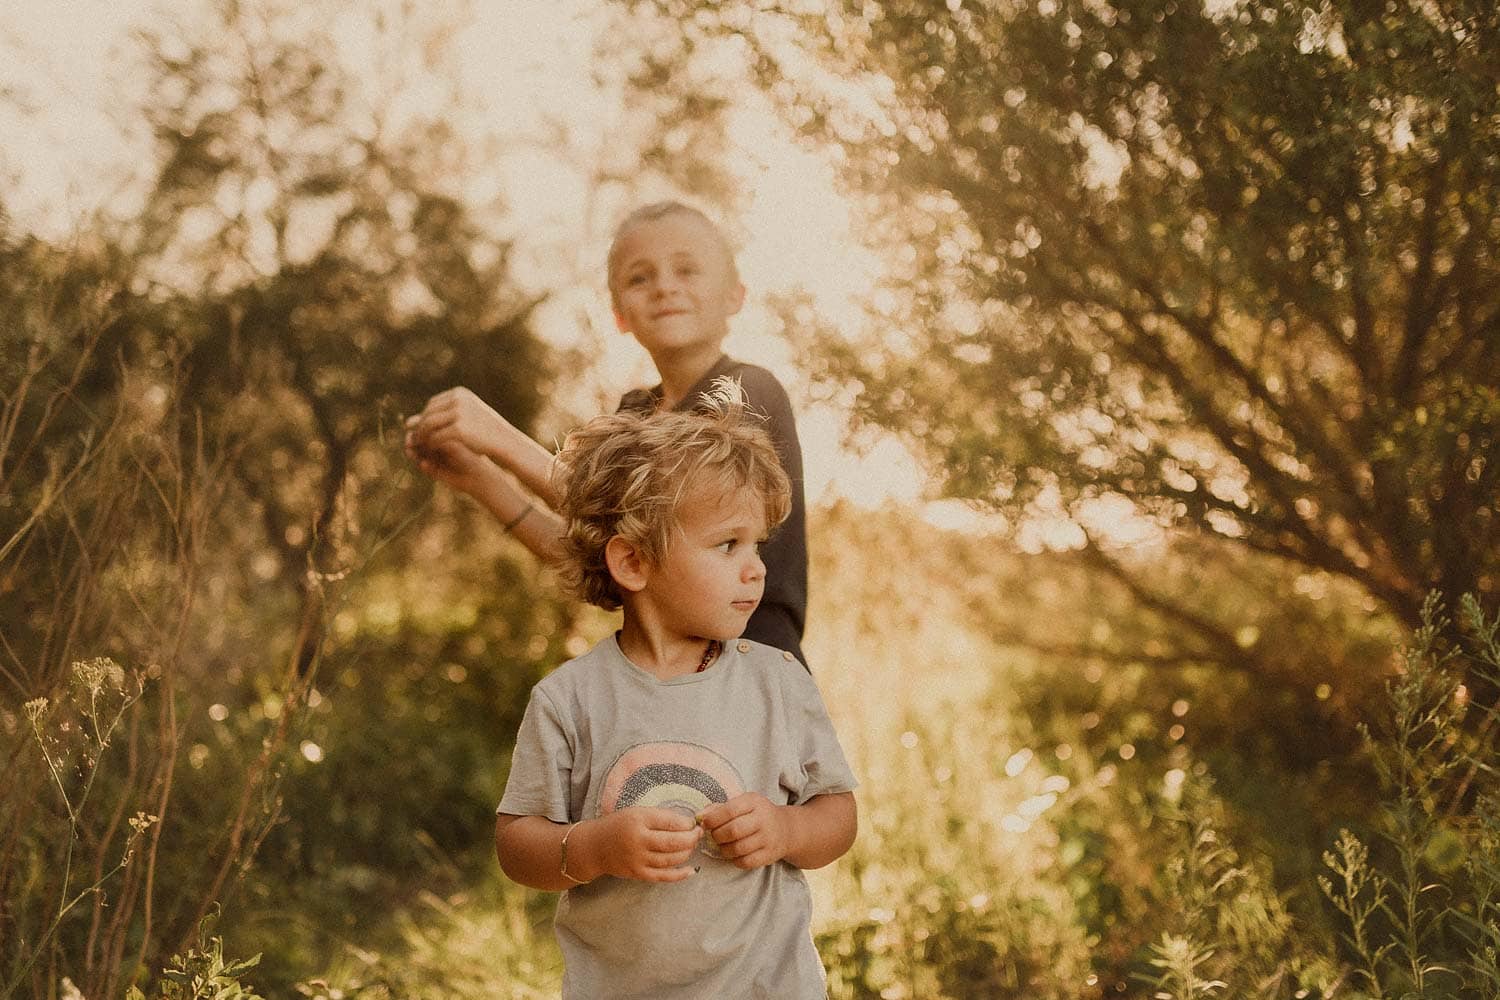 Family-photoraphy-sydney-two-young-blonde-boys-playing-in-bushlands-with-sunshine-lighting-up-background